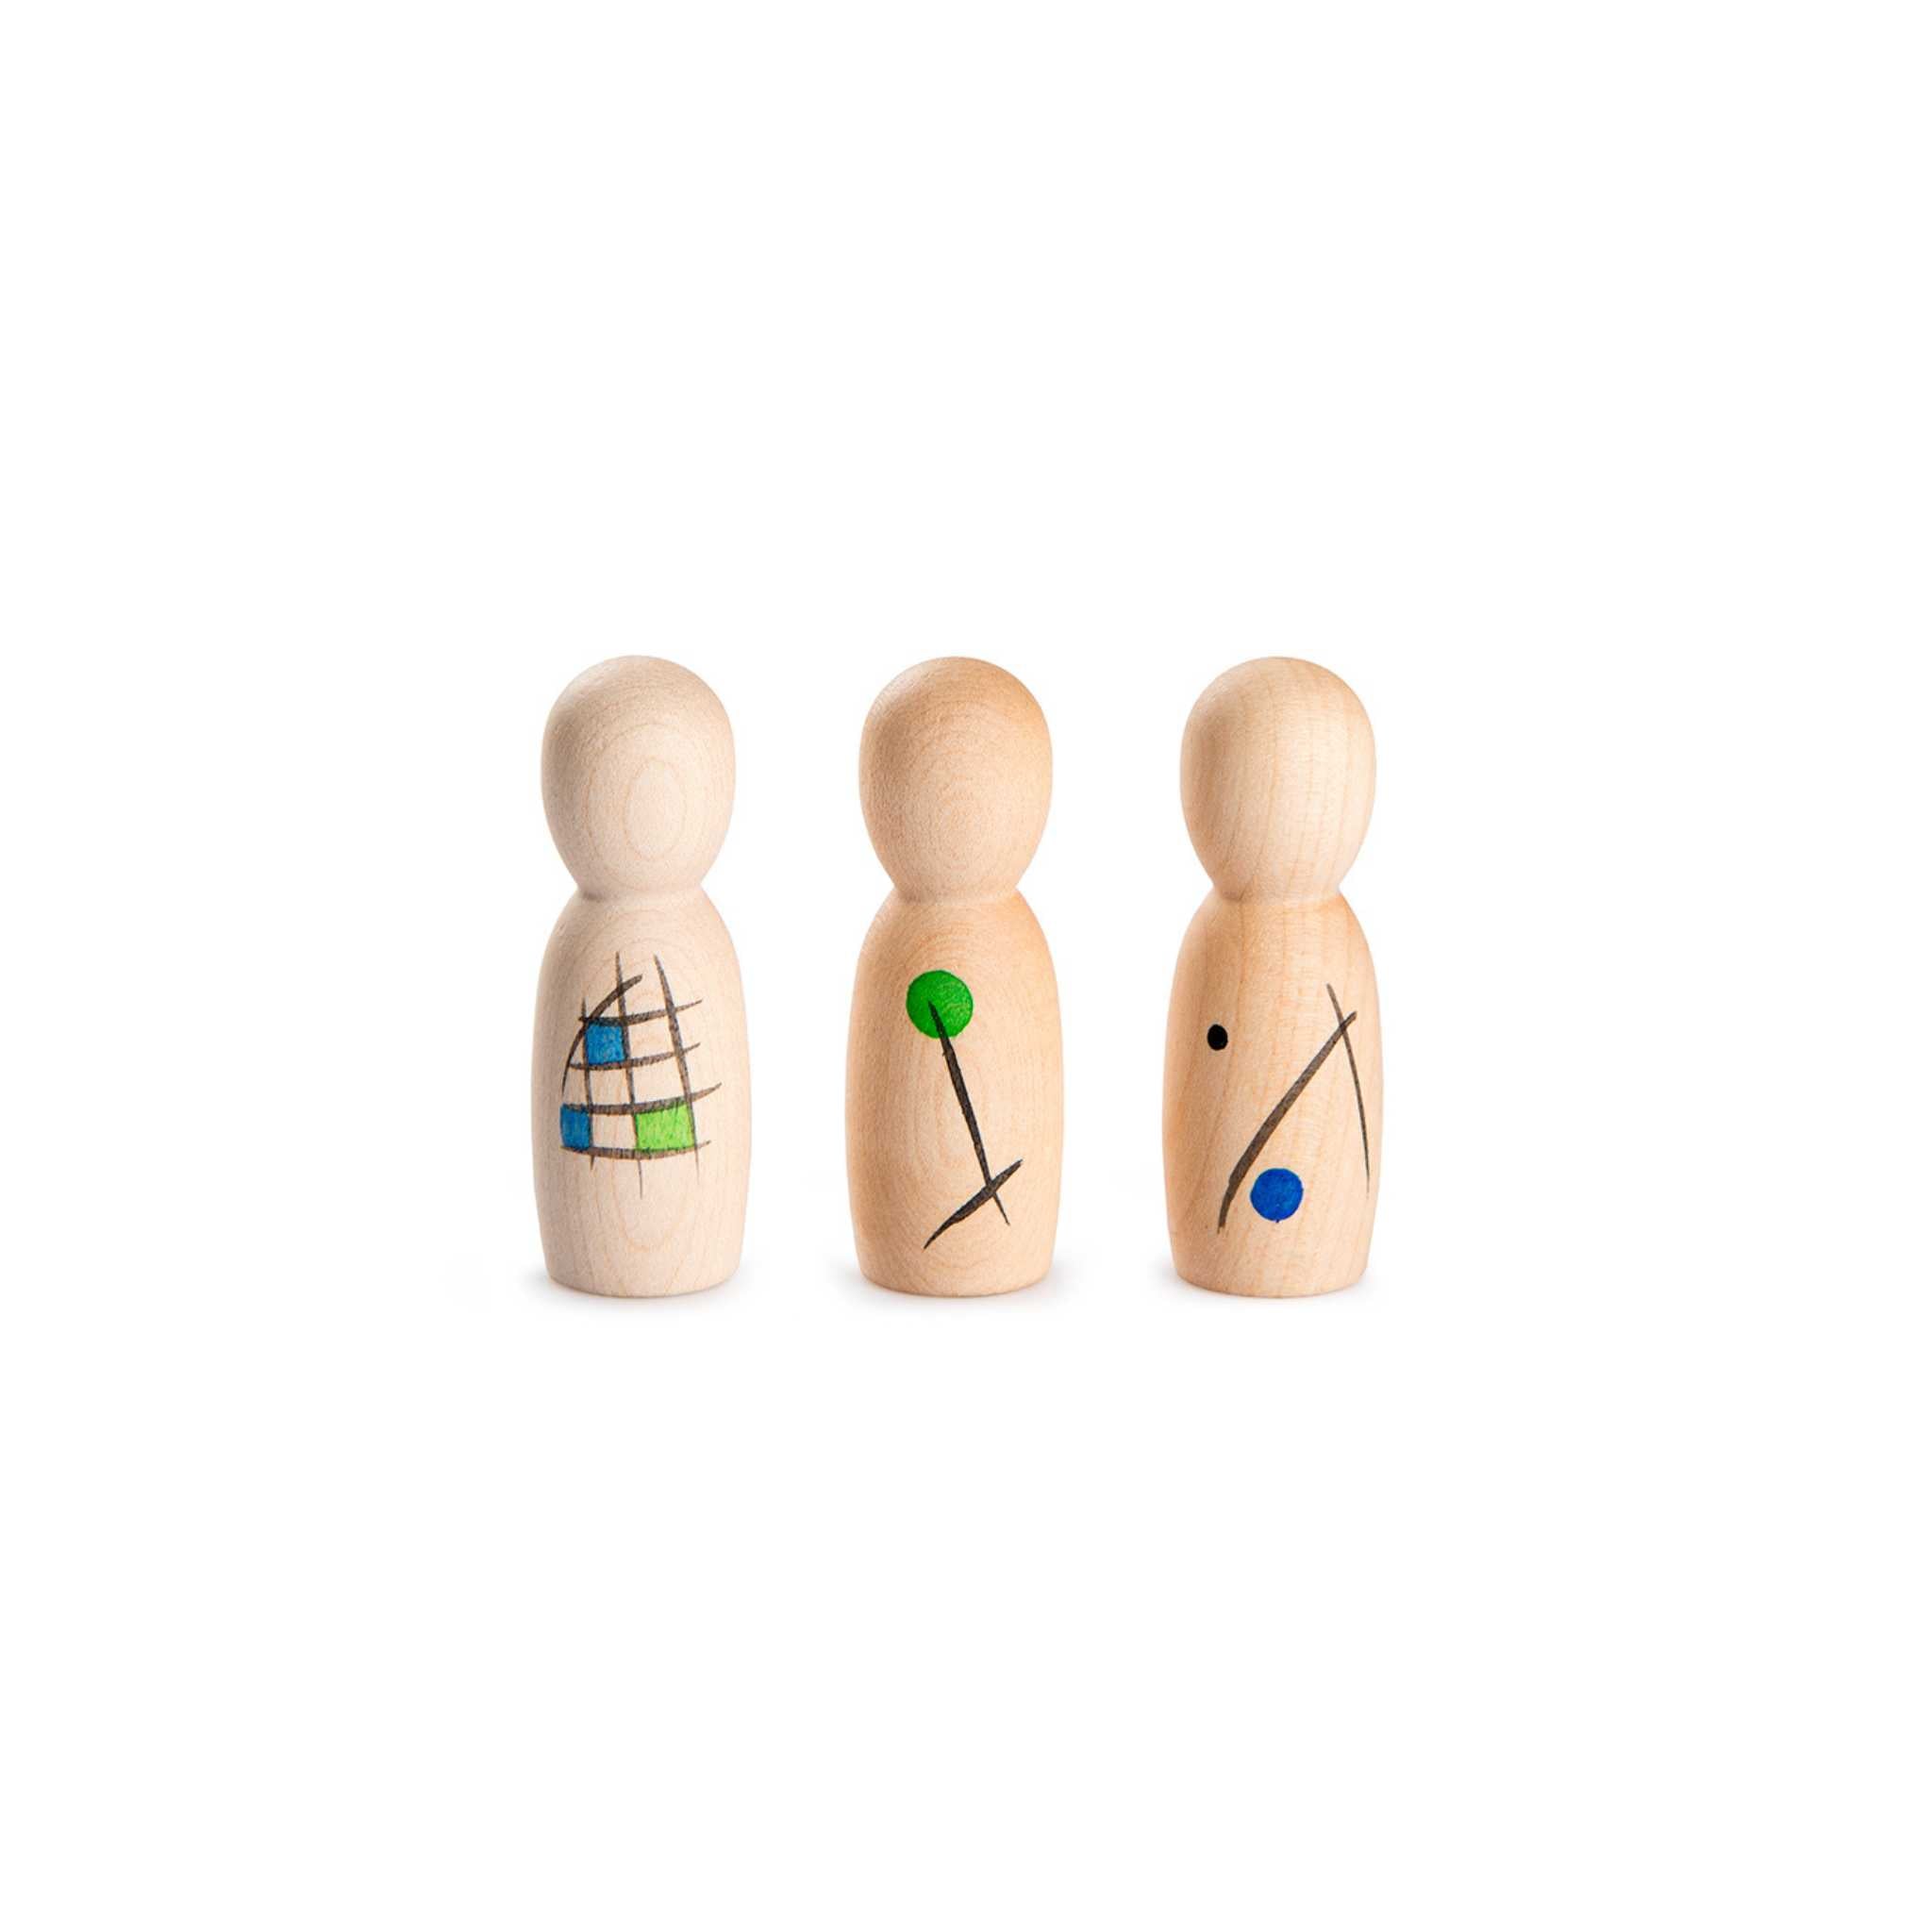 3 Wooden Toys From Grapat Lucky Lucky Collection on White Background